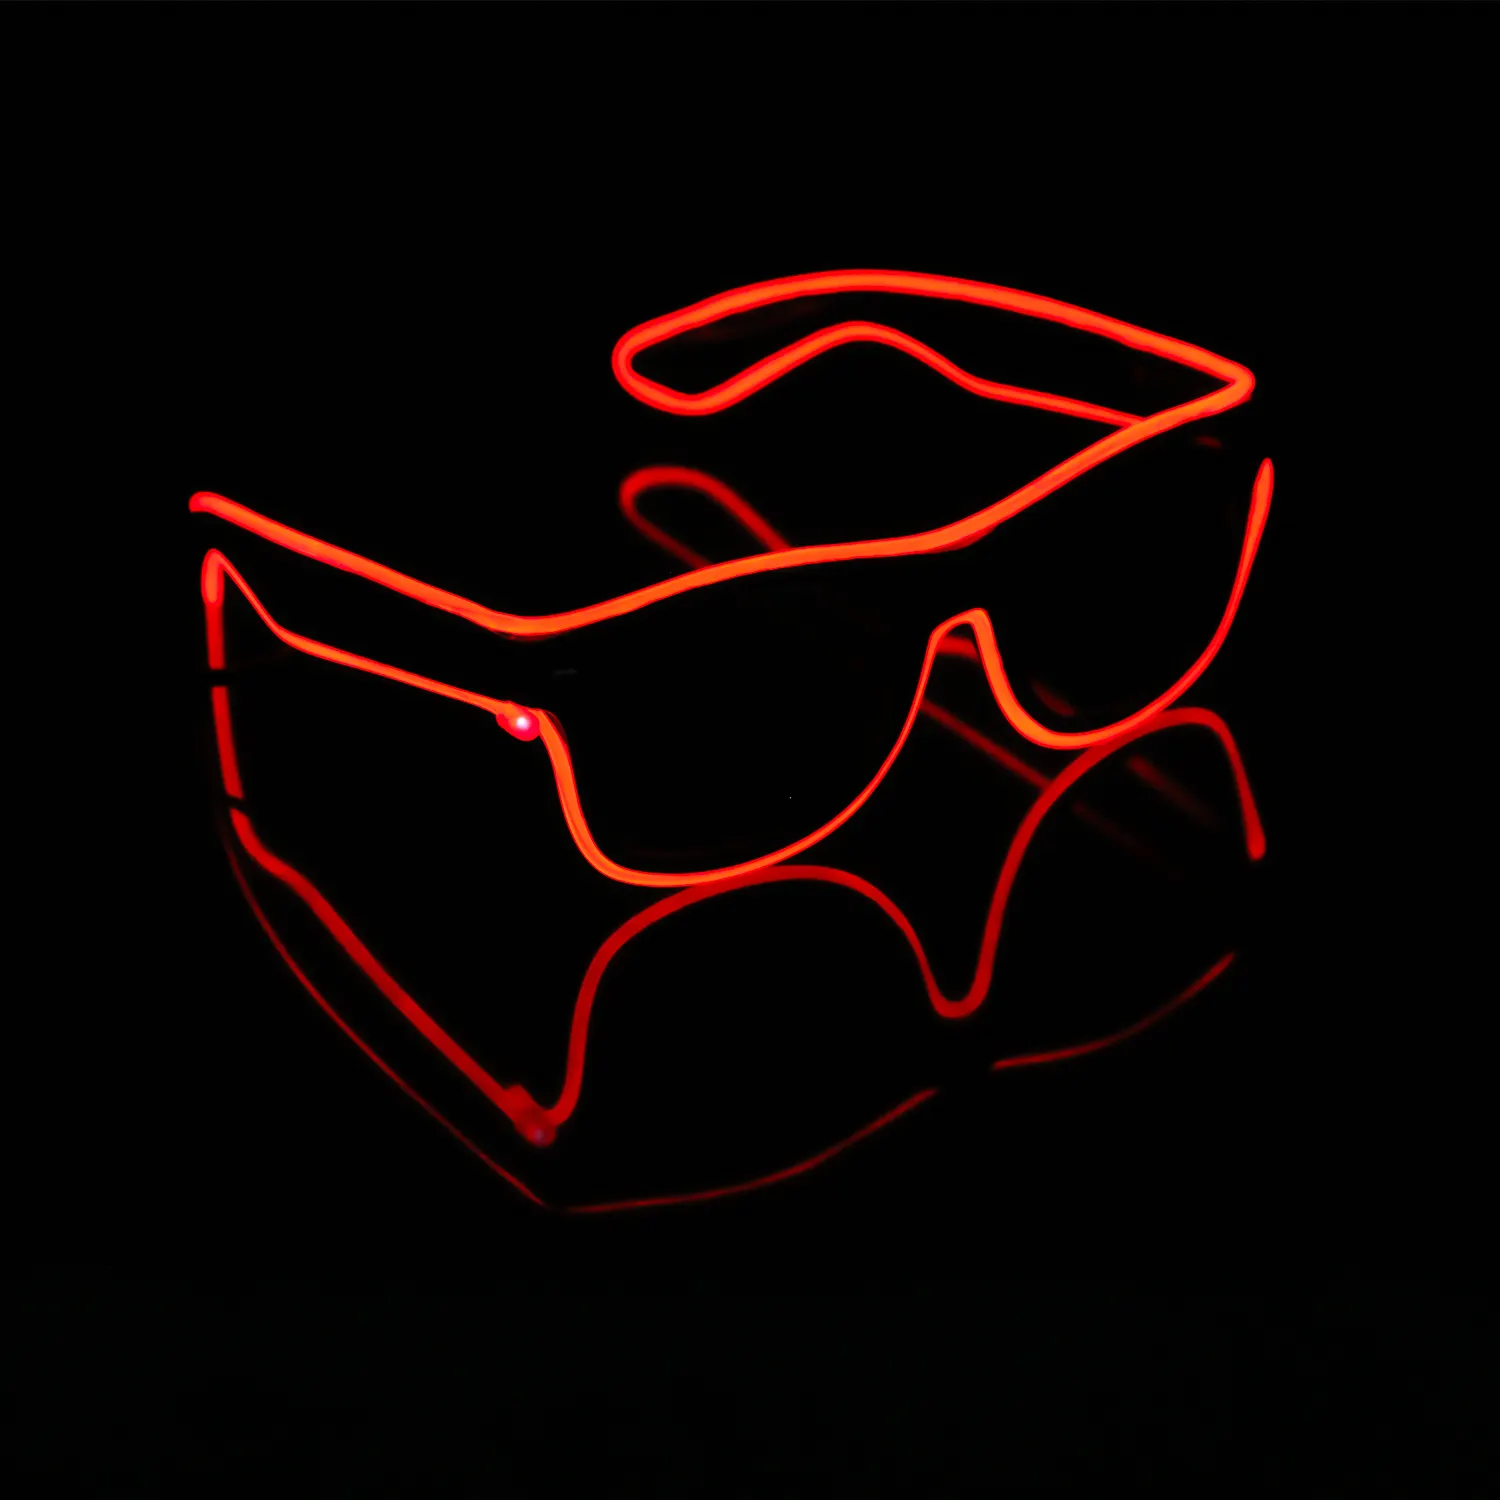 Promotional Items Party Supplies Light Up EL Wire Neon Rave Glasses For Glow DJ Costumes Halloween Party